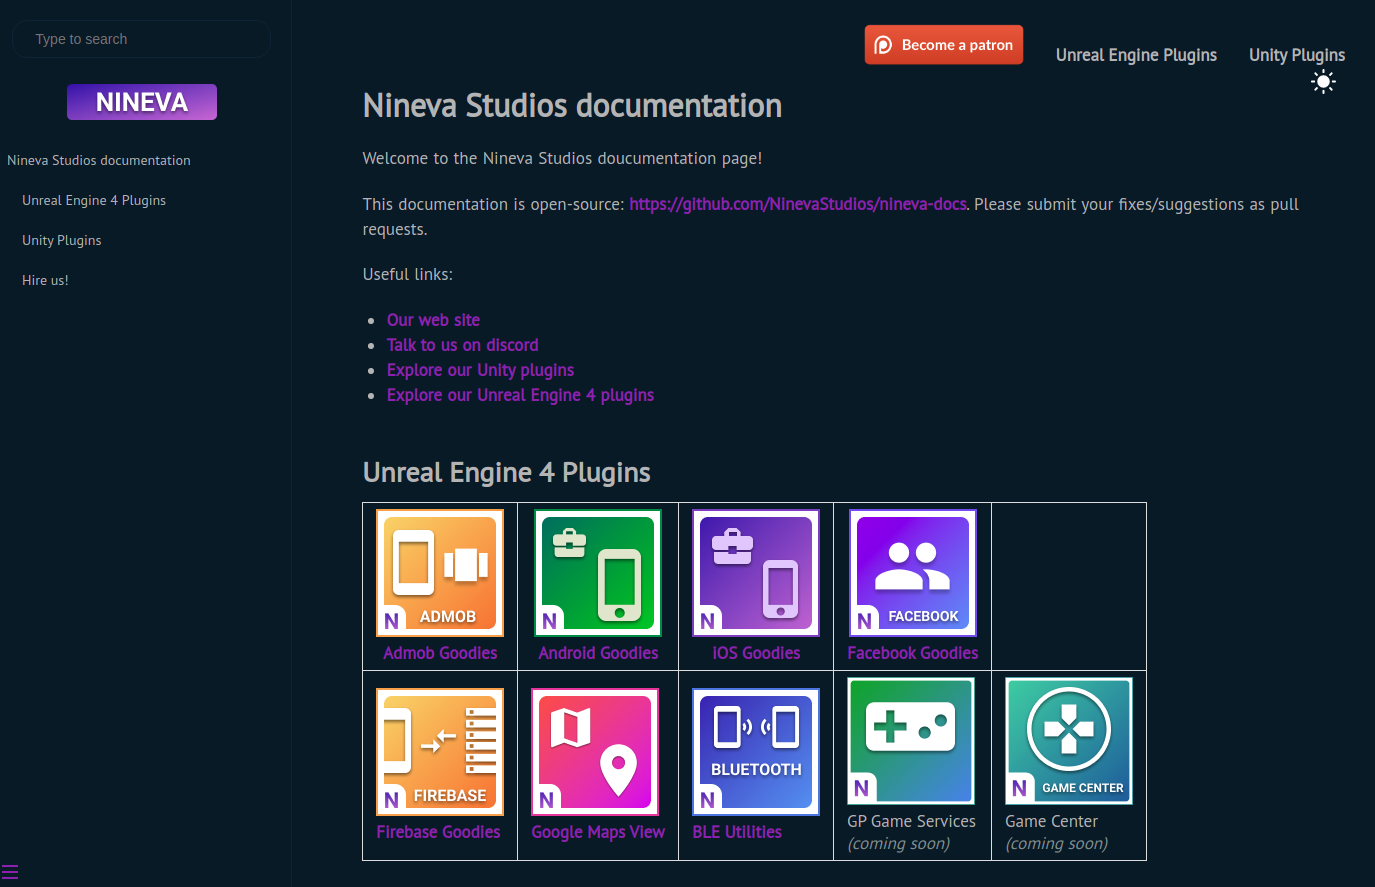 Play Services Goodies in Code Plugins - UE Marketplace